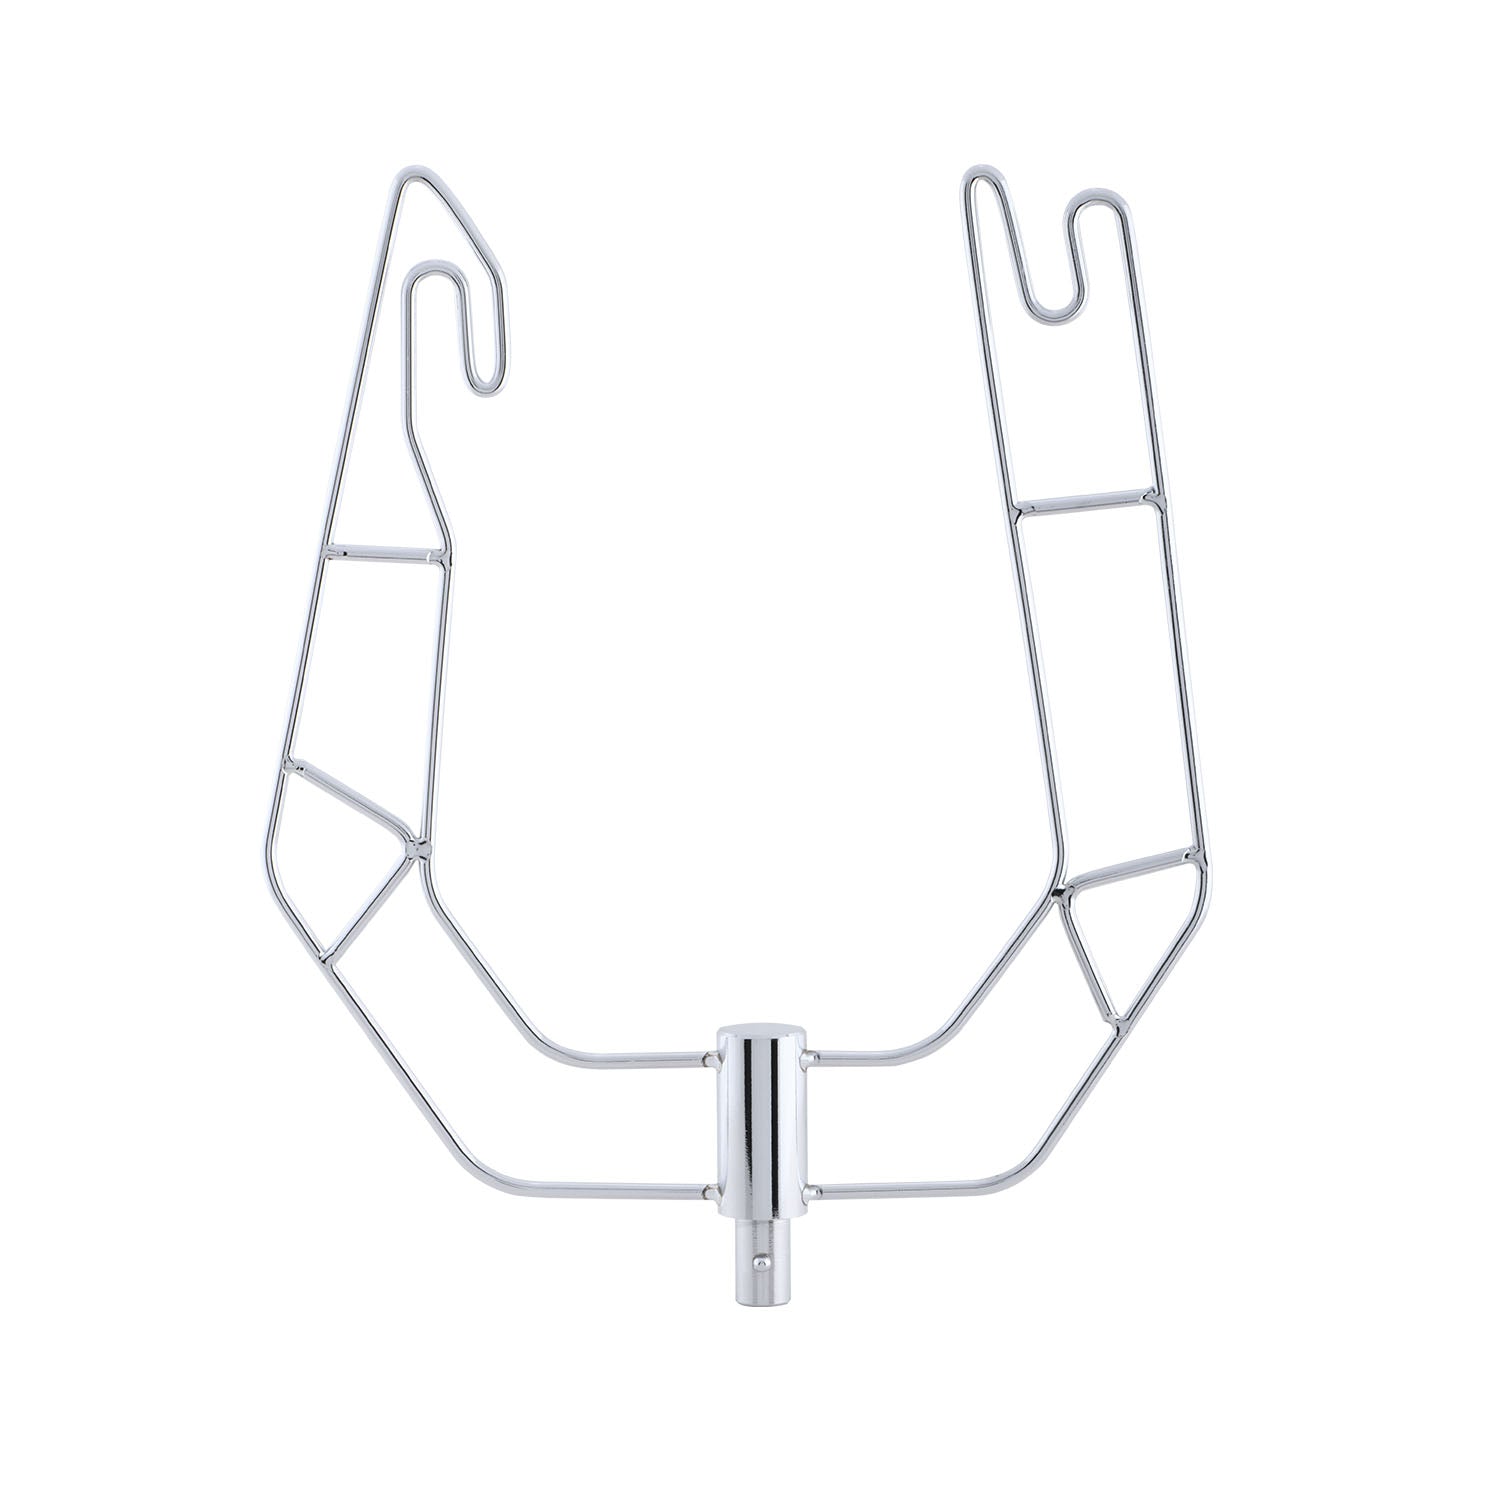 Kailas Stick Carabiner Fork Head & Rope Head 8cm & Double-threaded Screw Replacement